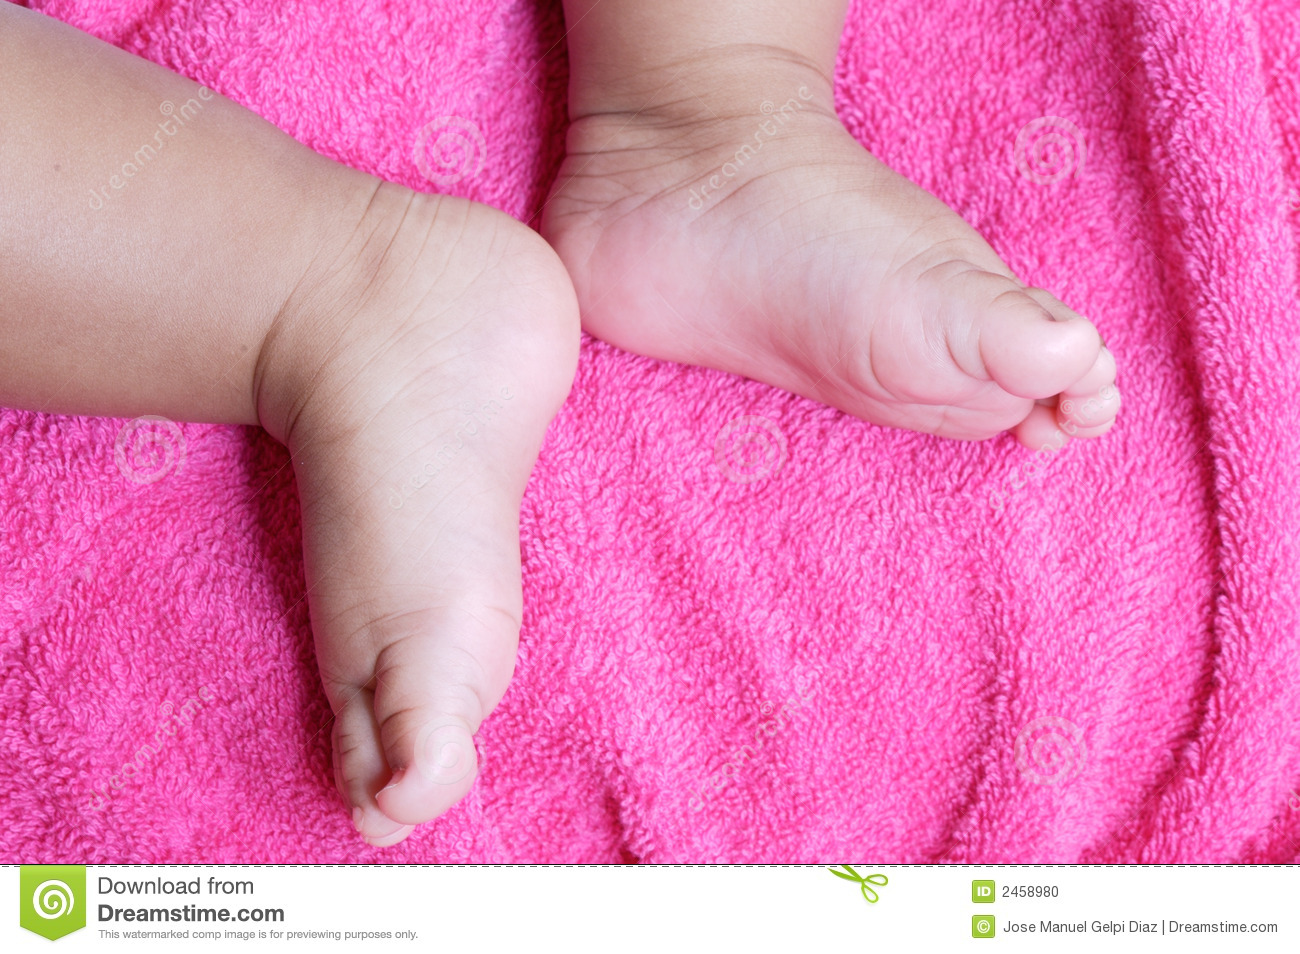 Baby Toes Stock Photo   Image  2458980